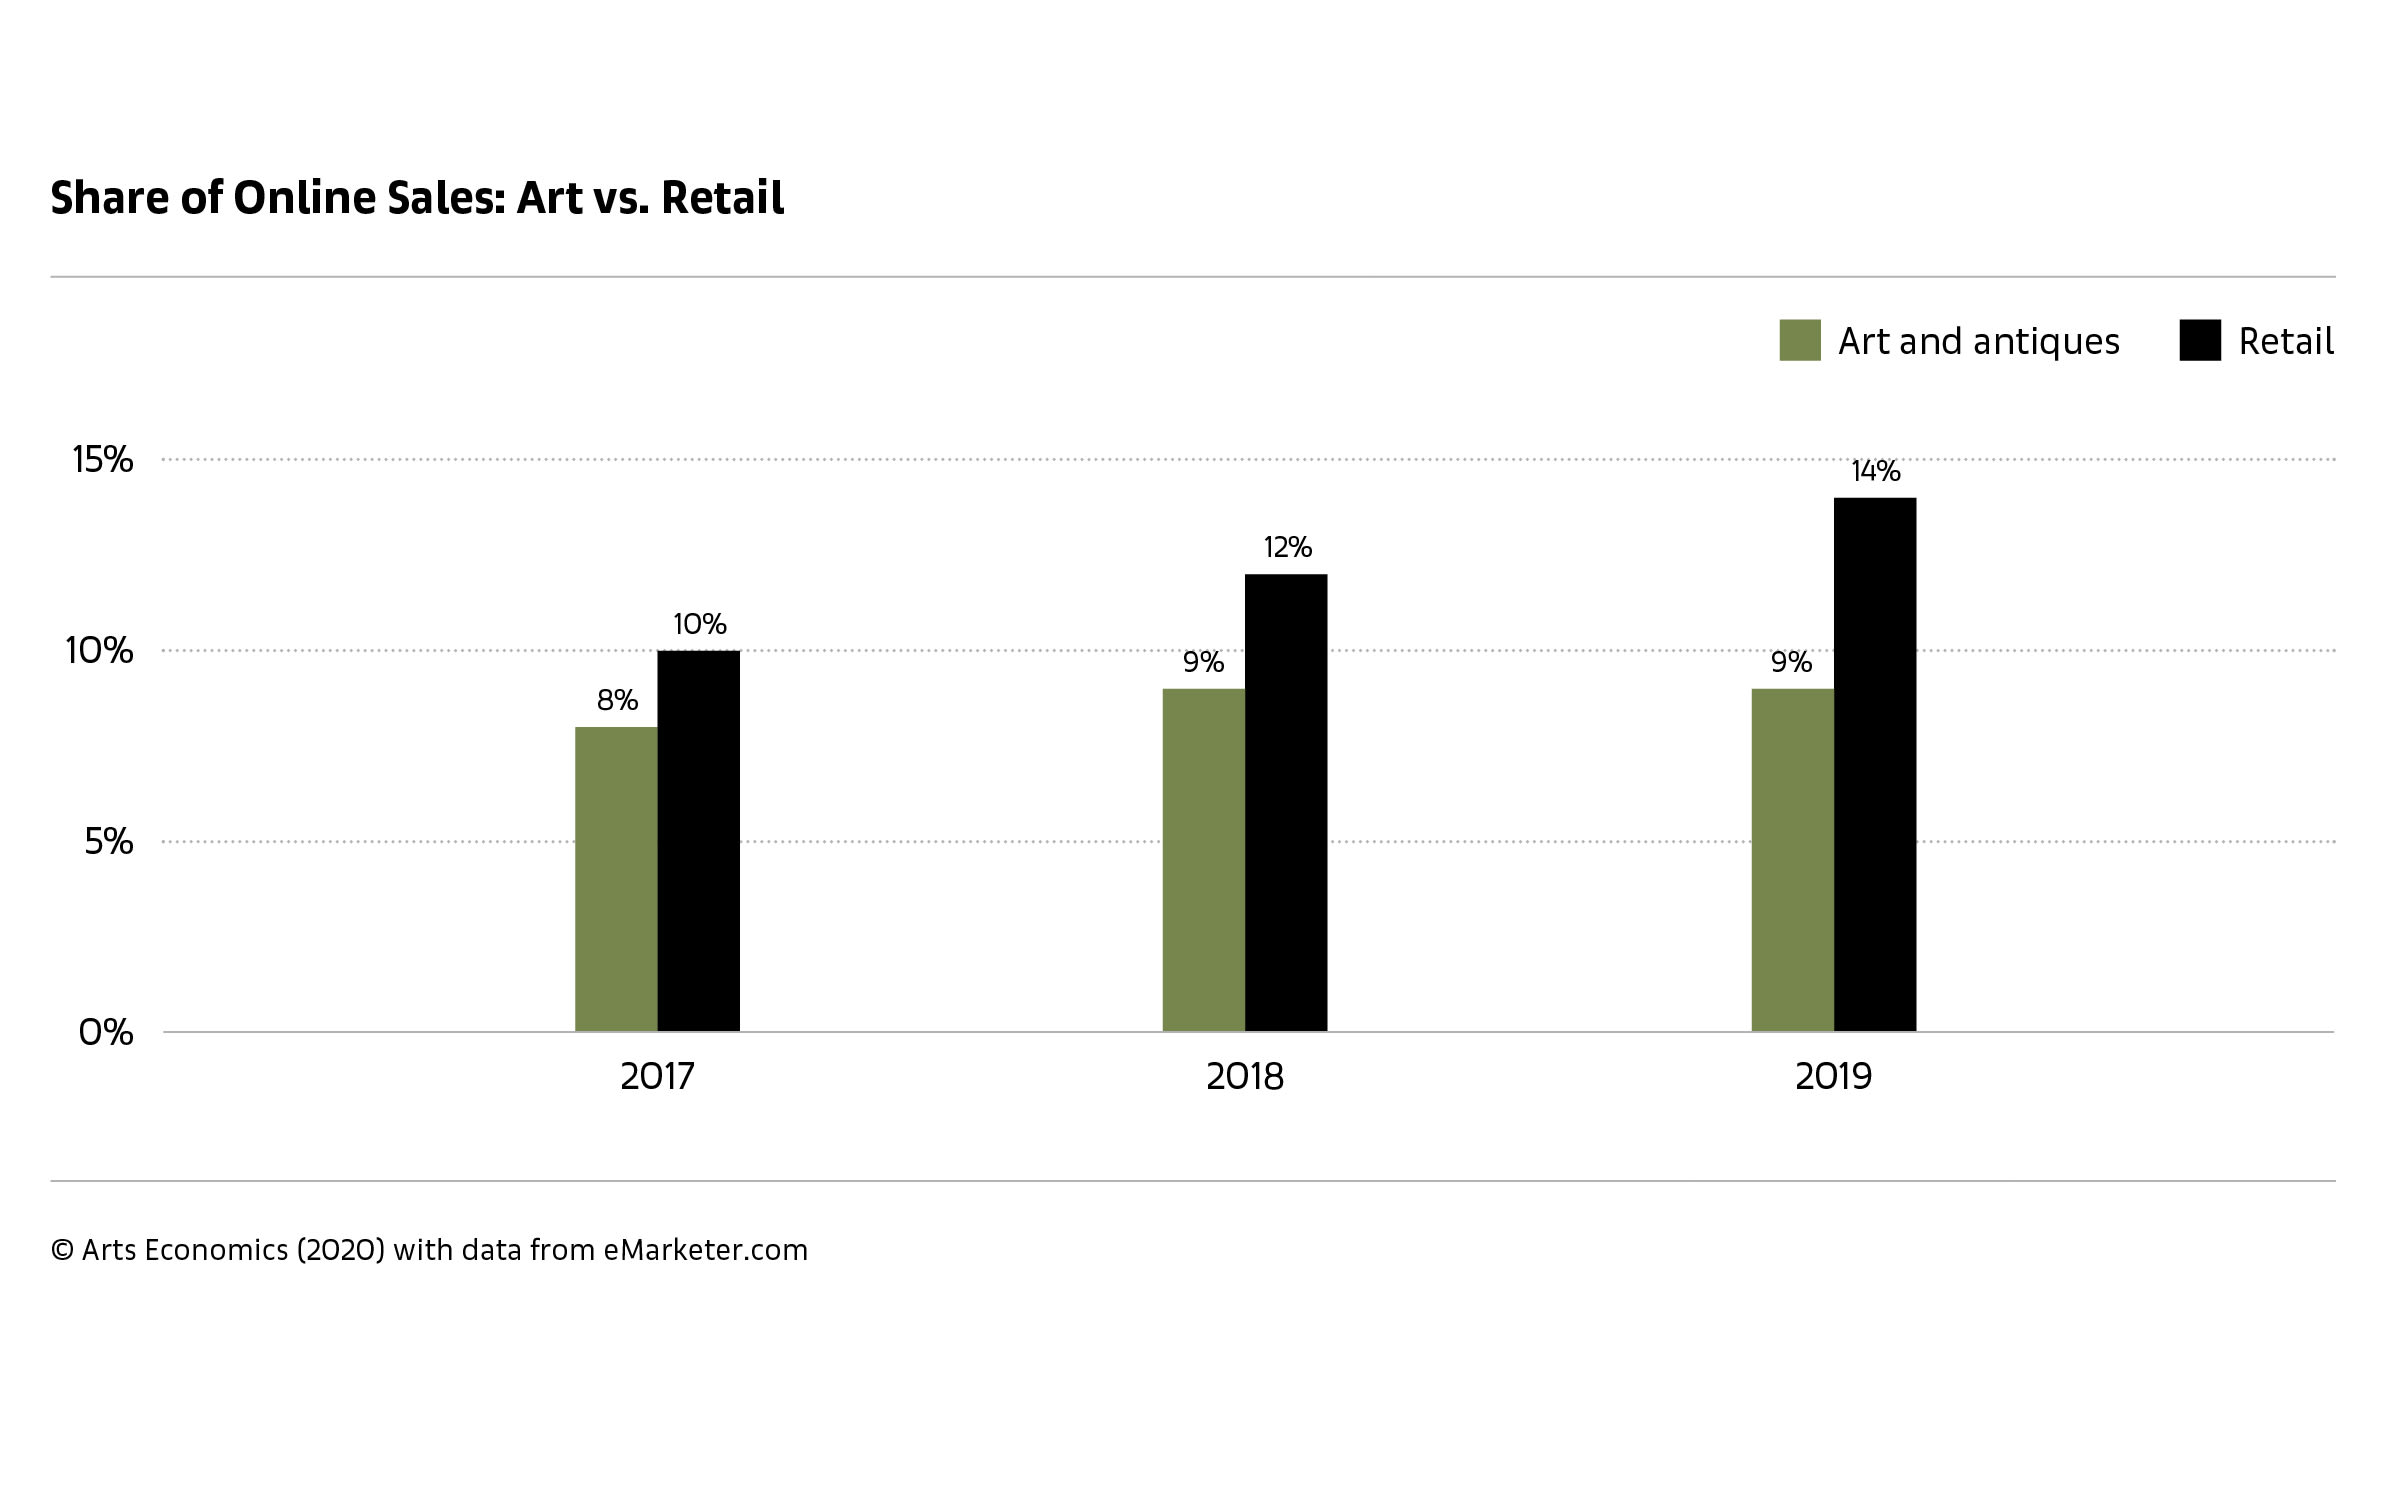 Many gallerists see online sales as a path forward, especially as younger generations become comfortable making major purchases via the internet.